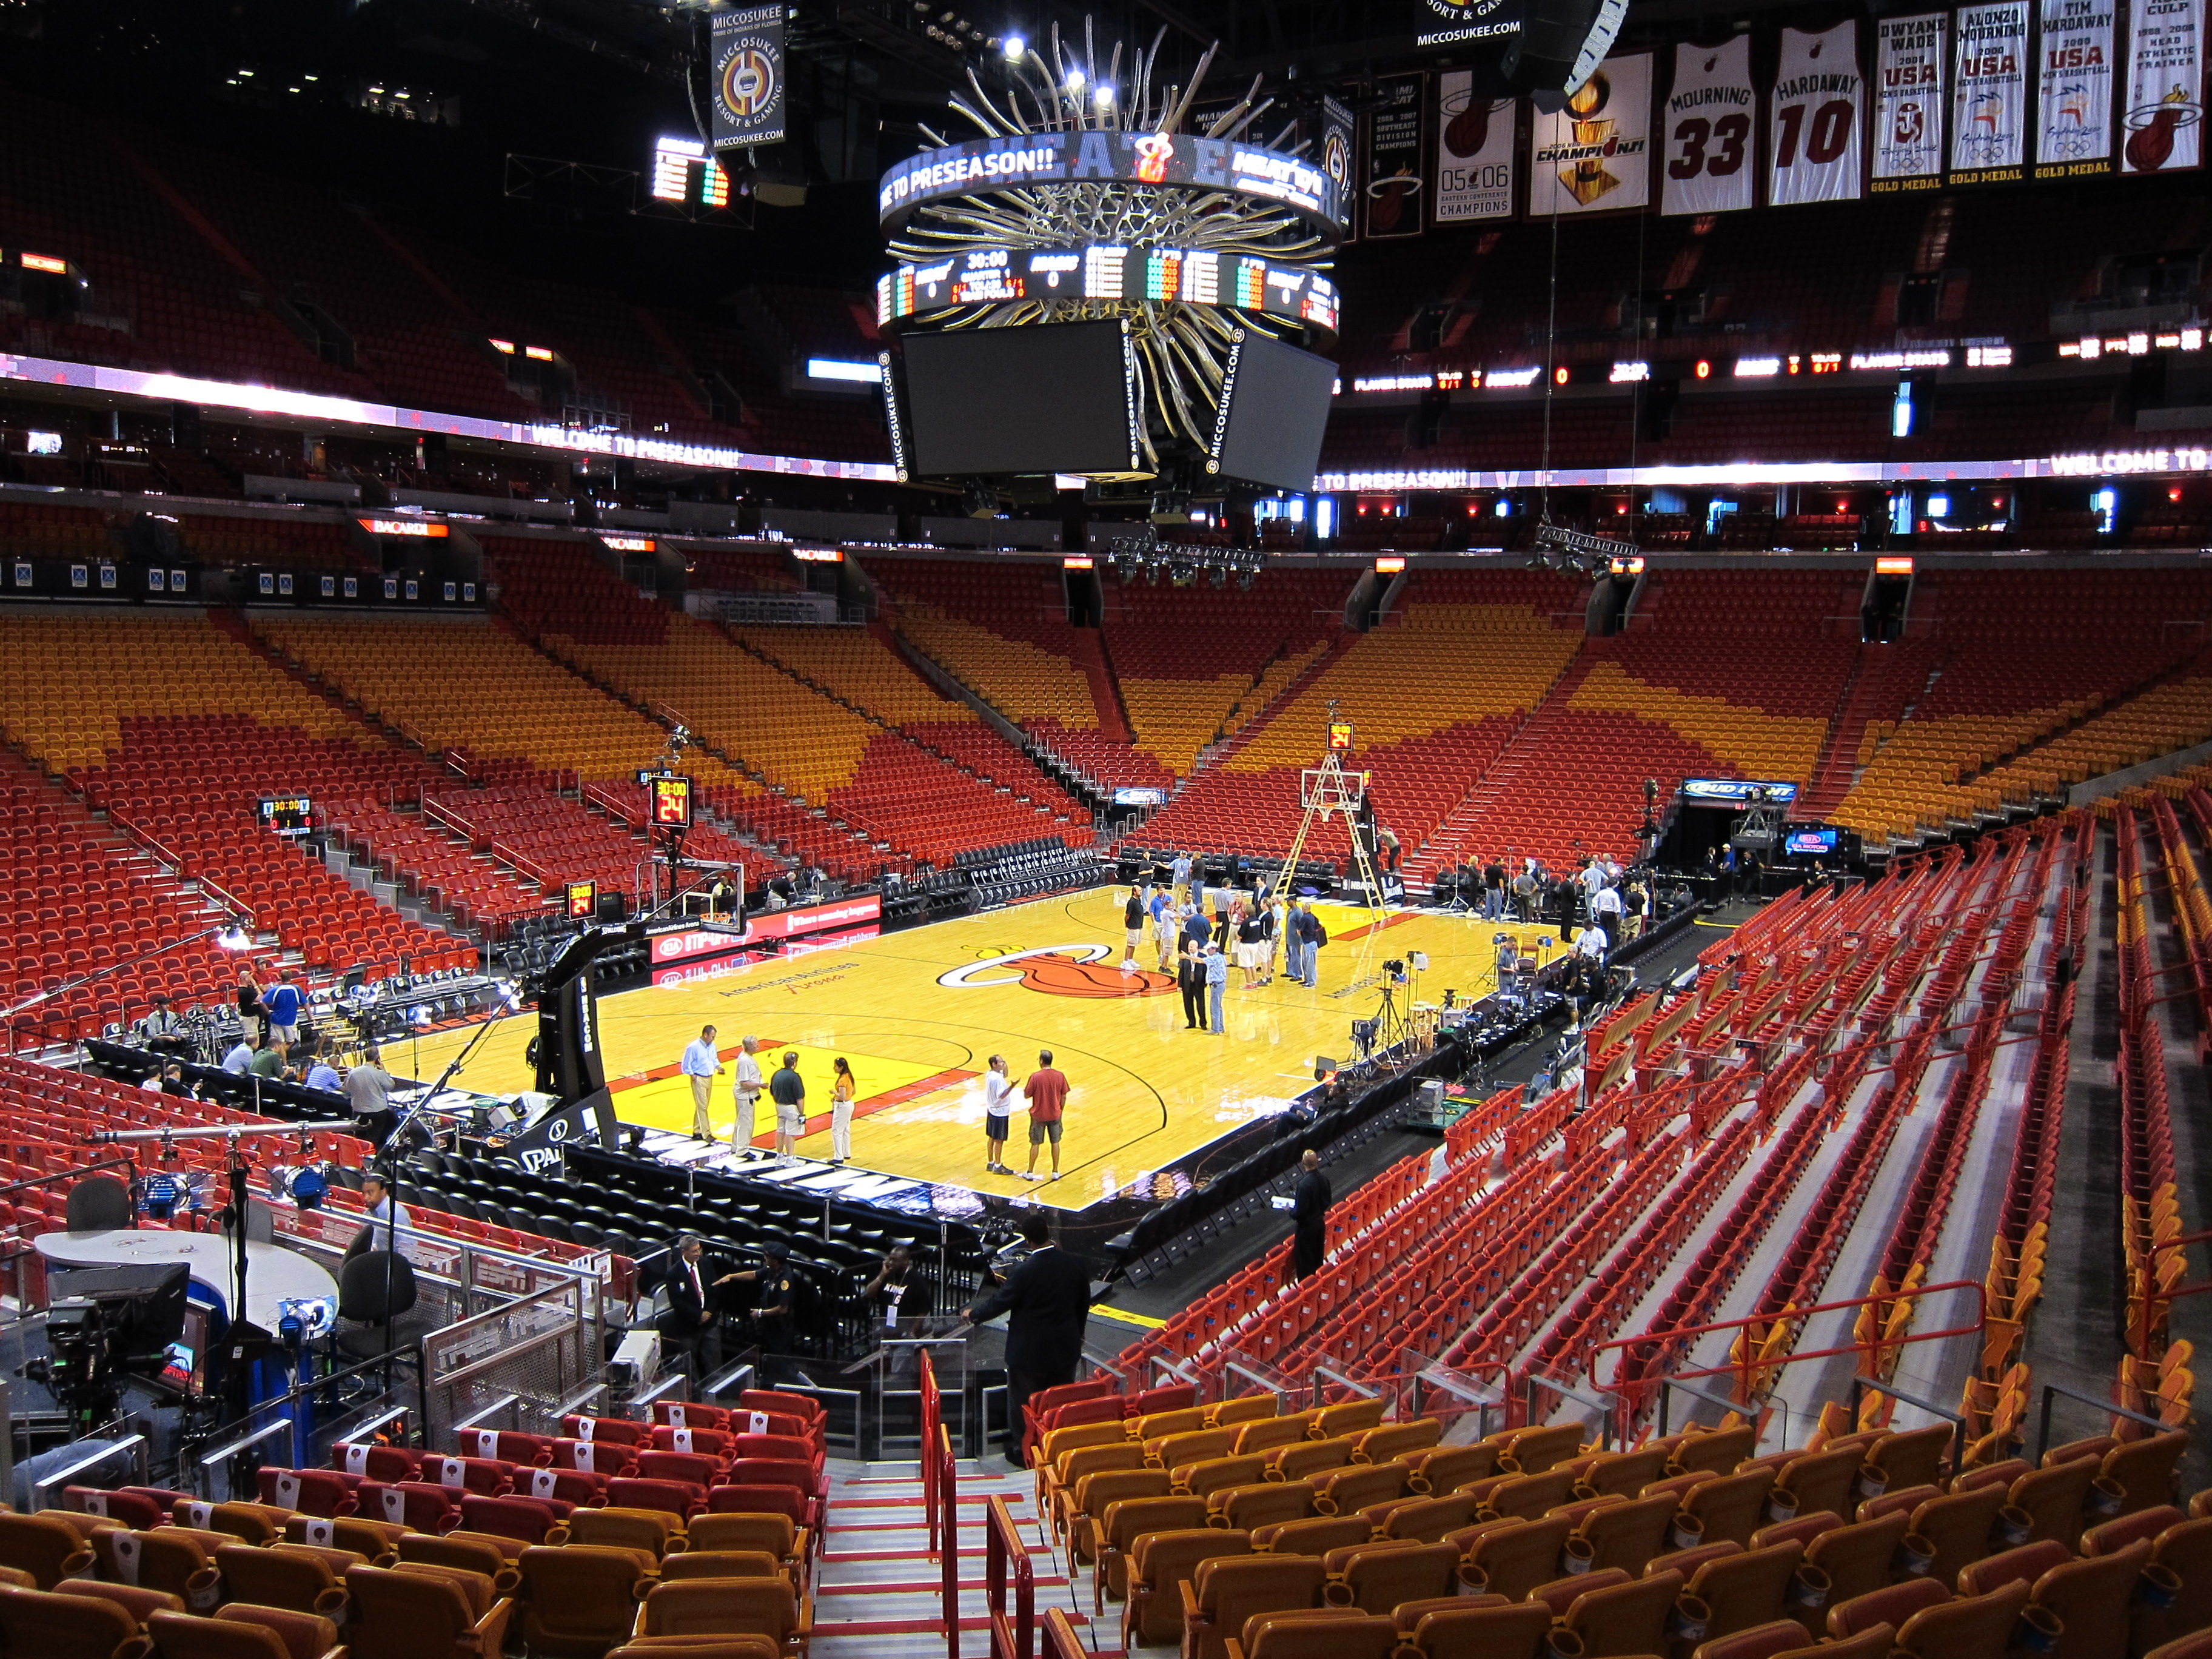 Best seats for Miami Heat Game? | Yahoo Answers